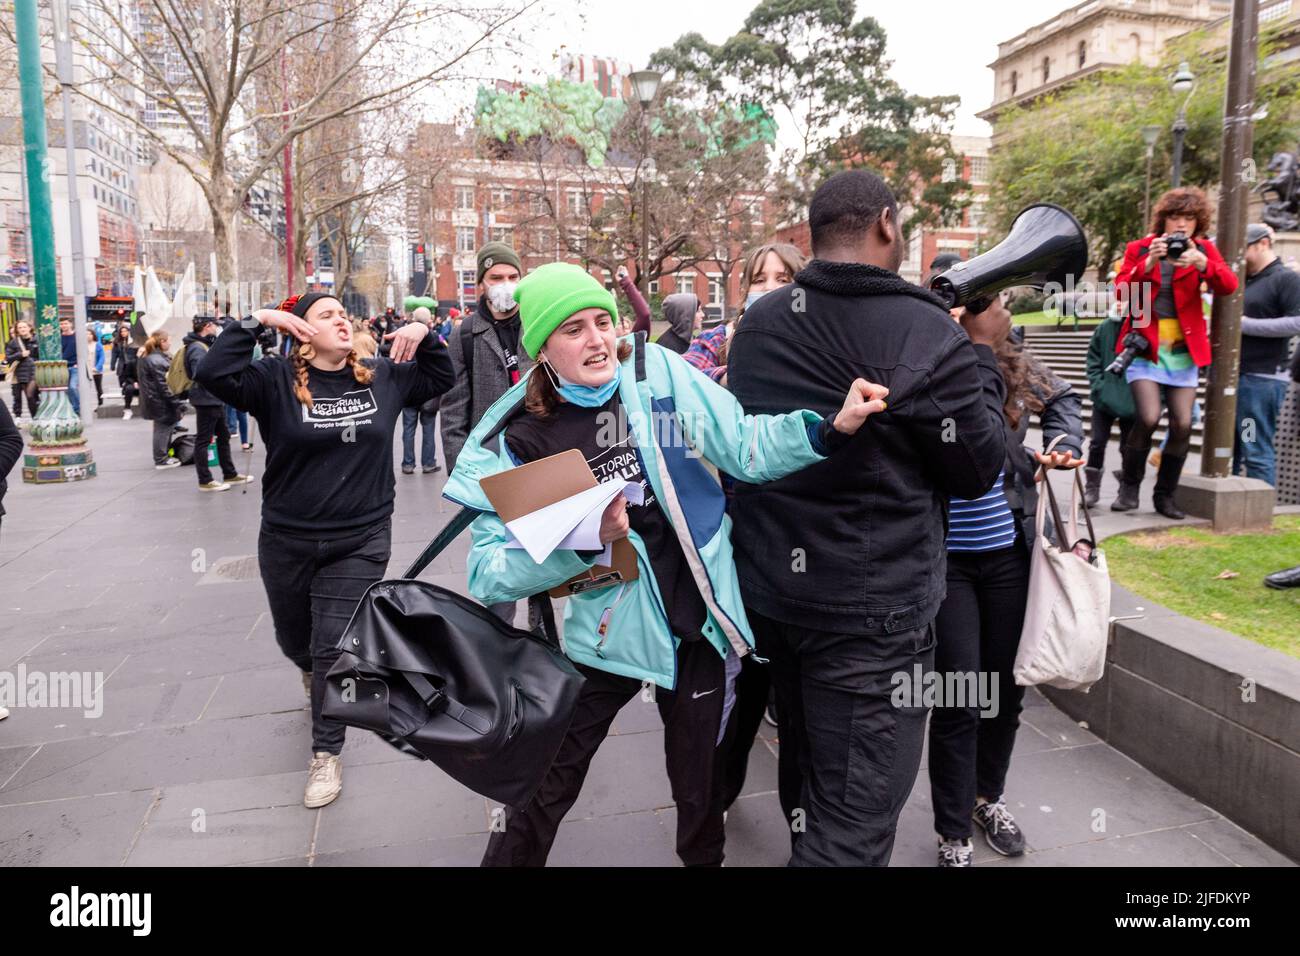 Melbourne, Australia, 2 July, 2022. A Christian anti-abortion activist is pushed by pro-choice demonstrators during a pro-choice protest in Melbourne that was held in reaction to the US Supreme Court's decision to overturn Roe v. Wade and abolish the constitutional right to abortion in the USA. Credit: Michael Currie/Speed Media/Alamy Live News Stock Photo